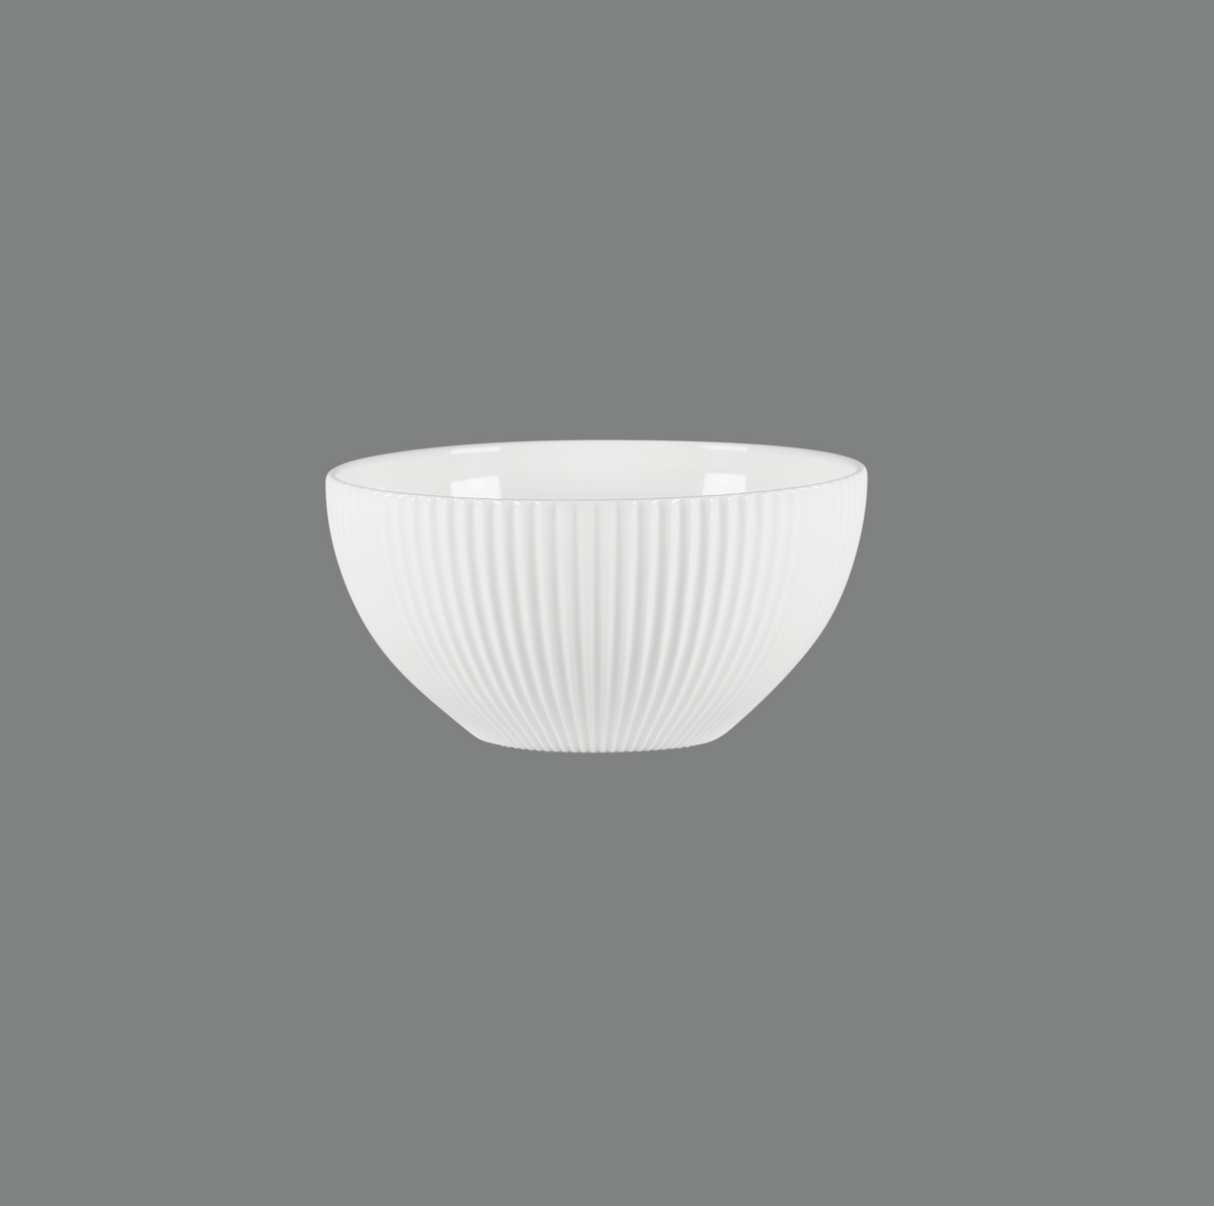 Spectra Round Bowl - 780ml: Pack of 12